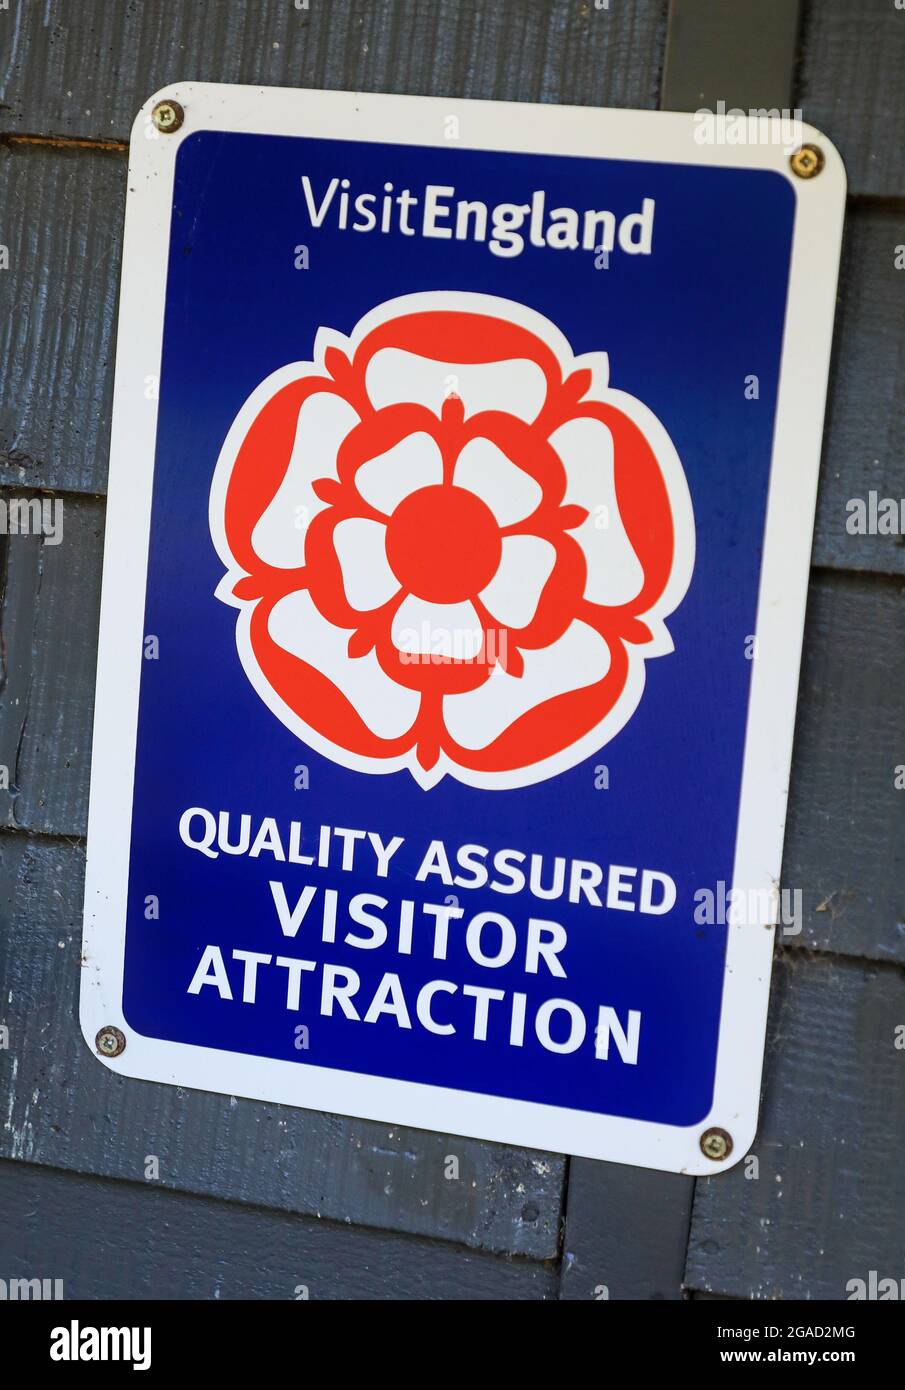 Sign for 'Visit England', 'Quality Assured Visitor Attraction', England, UK Stock Photo